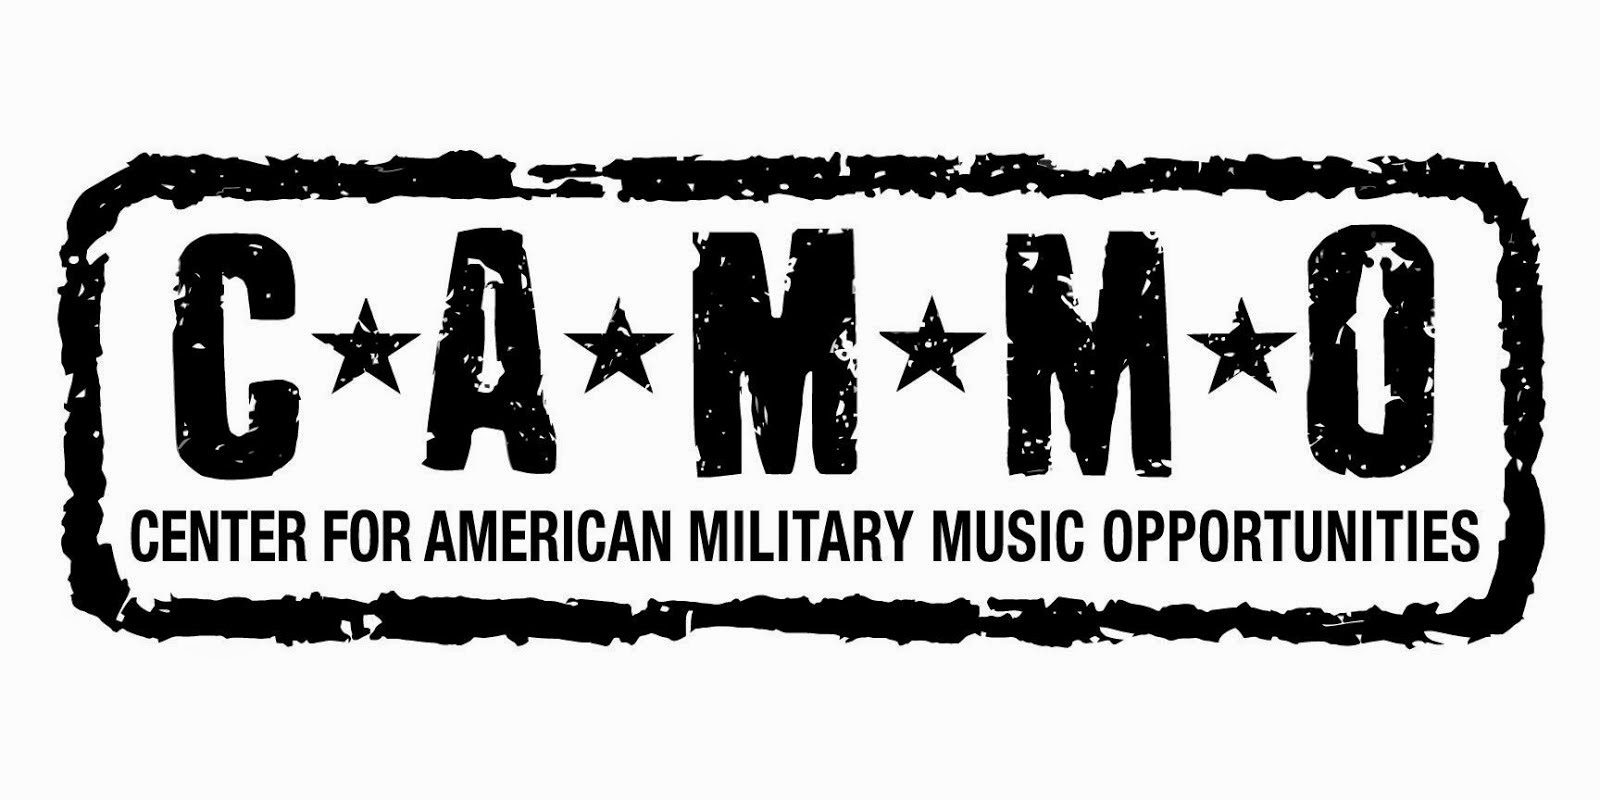 Center for American Military Music Opportunities